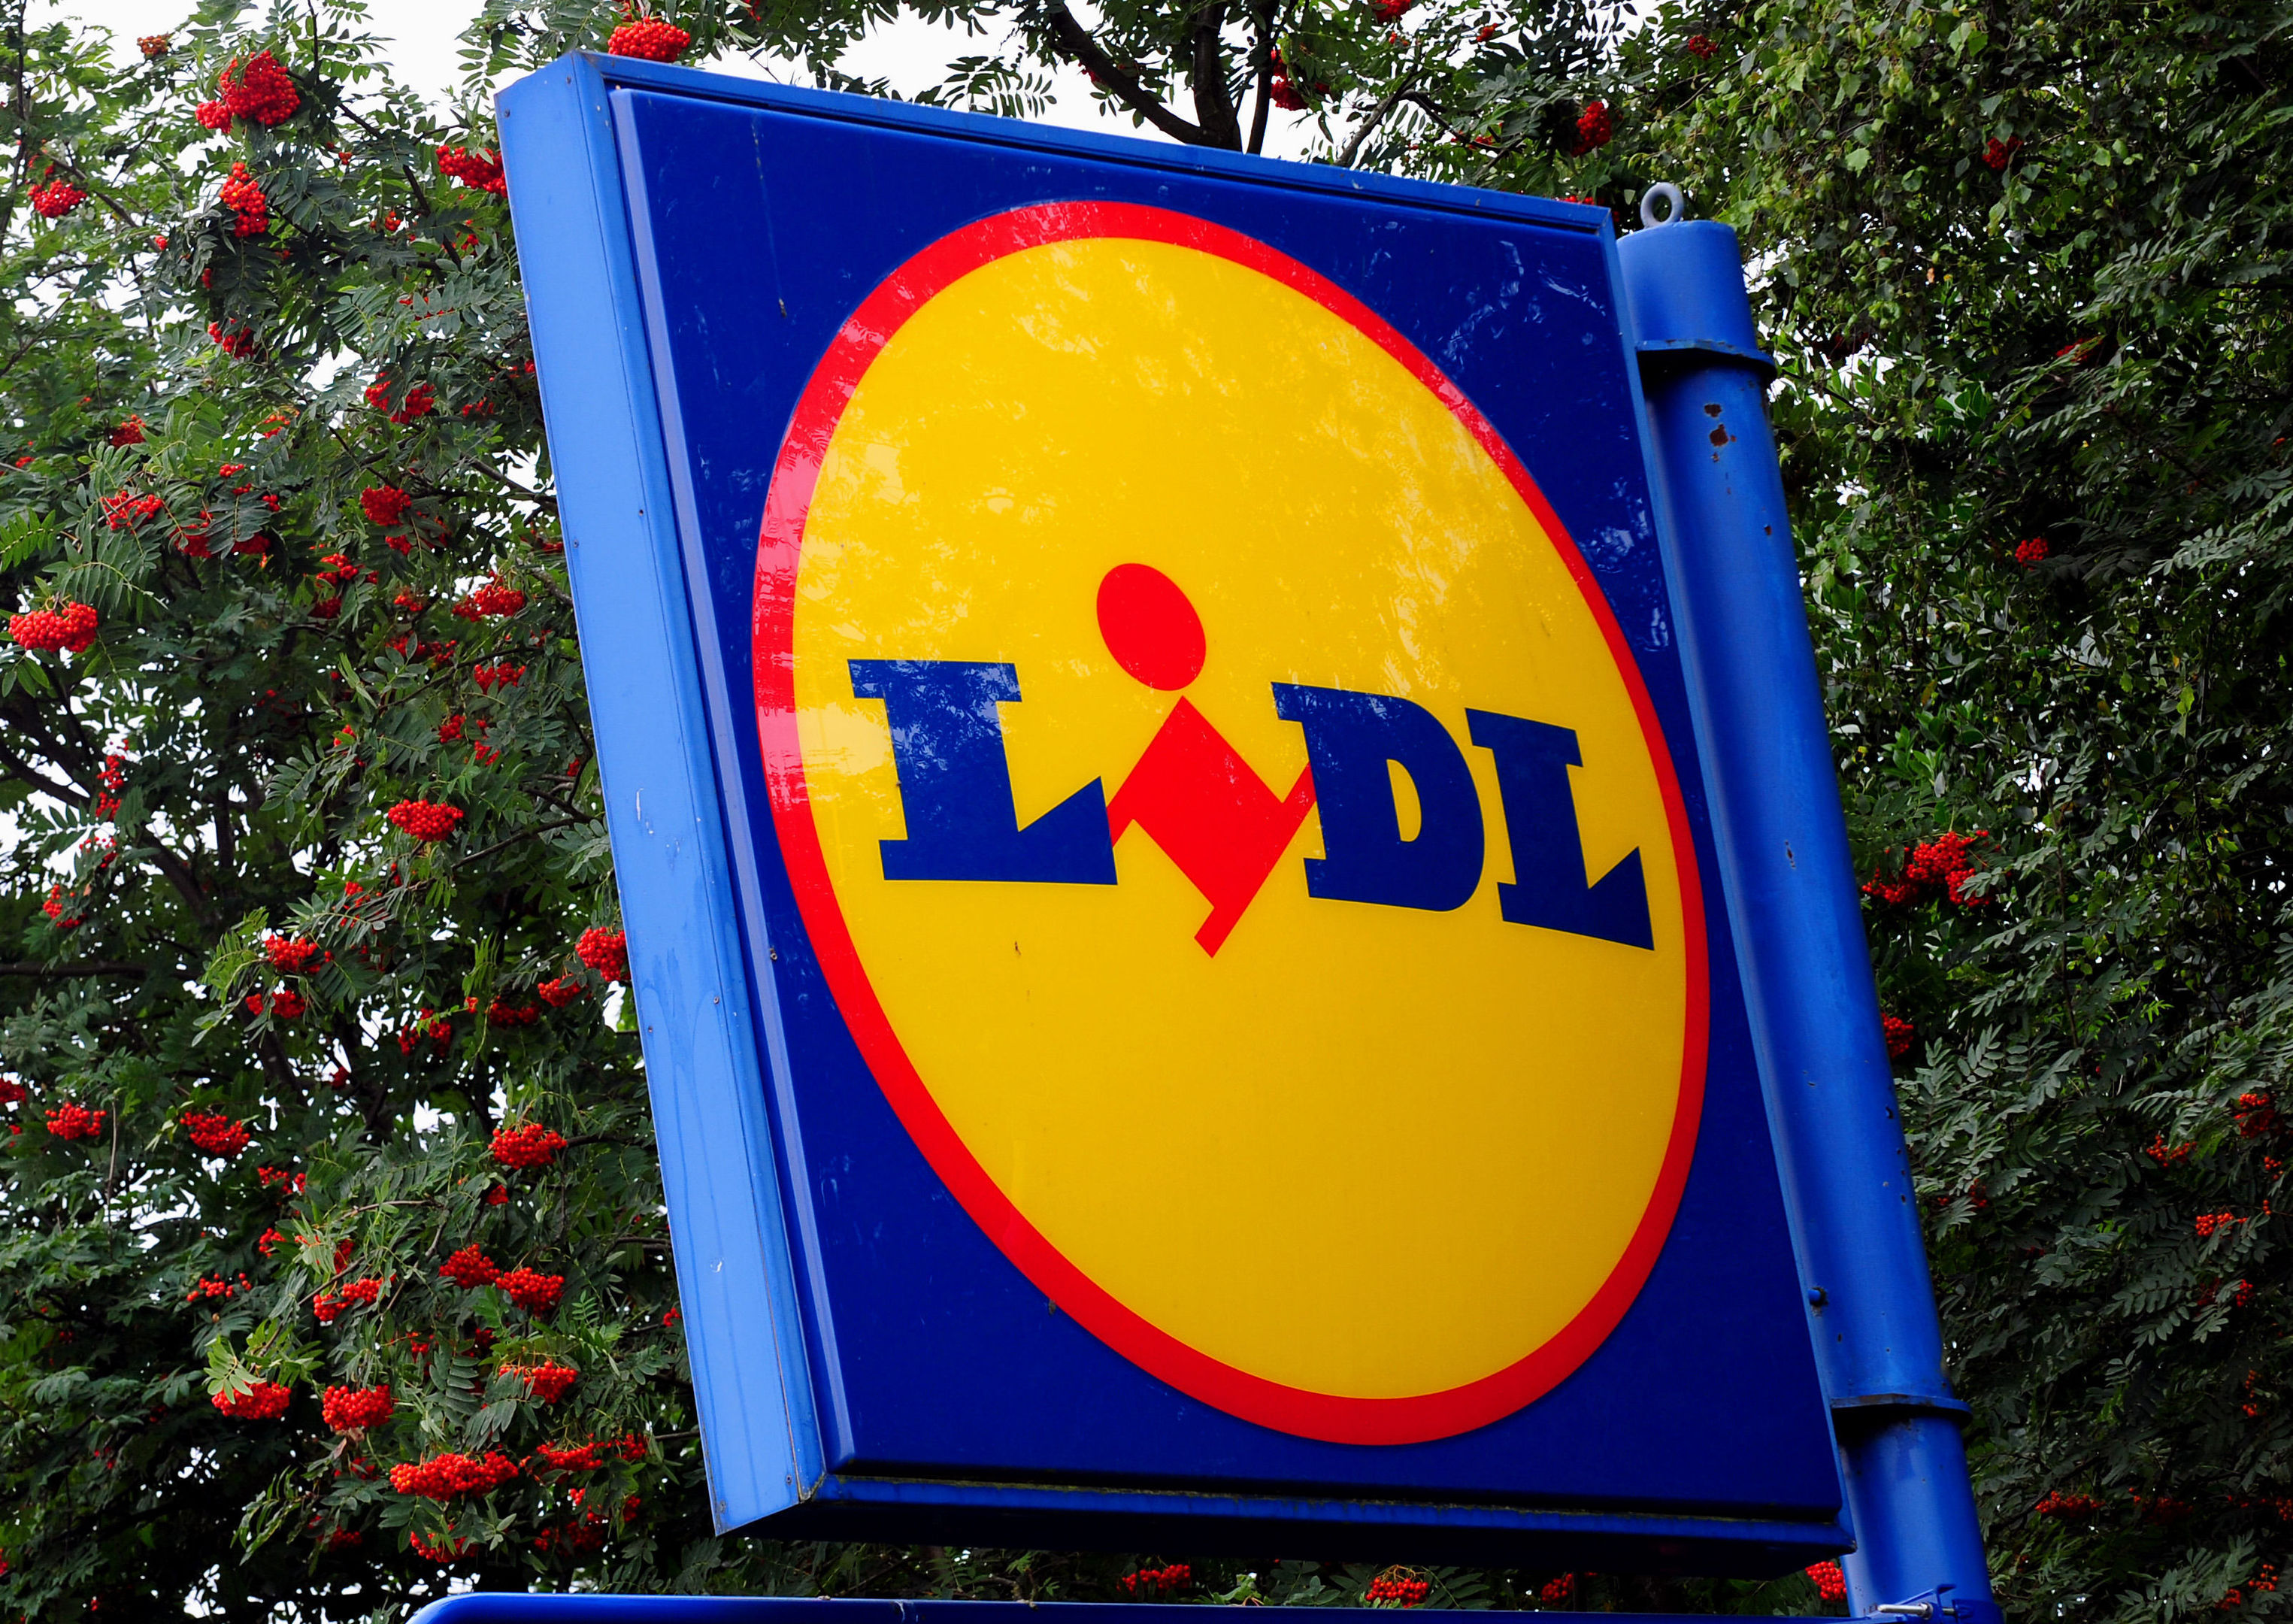 Almost two thirds of shoppers visited a Lidl or its rival Aldi in the past three months, with the two retailers now accounting for almost £1 in every £8 spent in Britain's supermarkets, up from £1 in £25 a decade ago, Kantar Worldpanel said. (Rui Vieira/PA Wire)